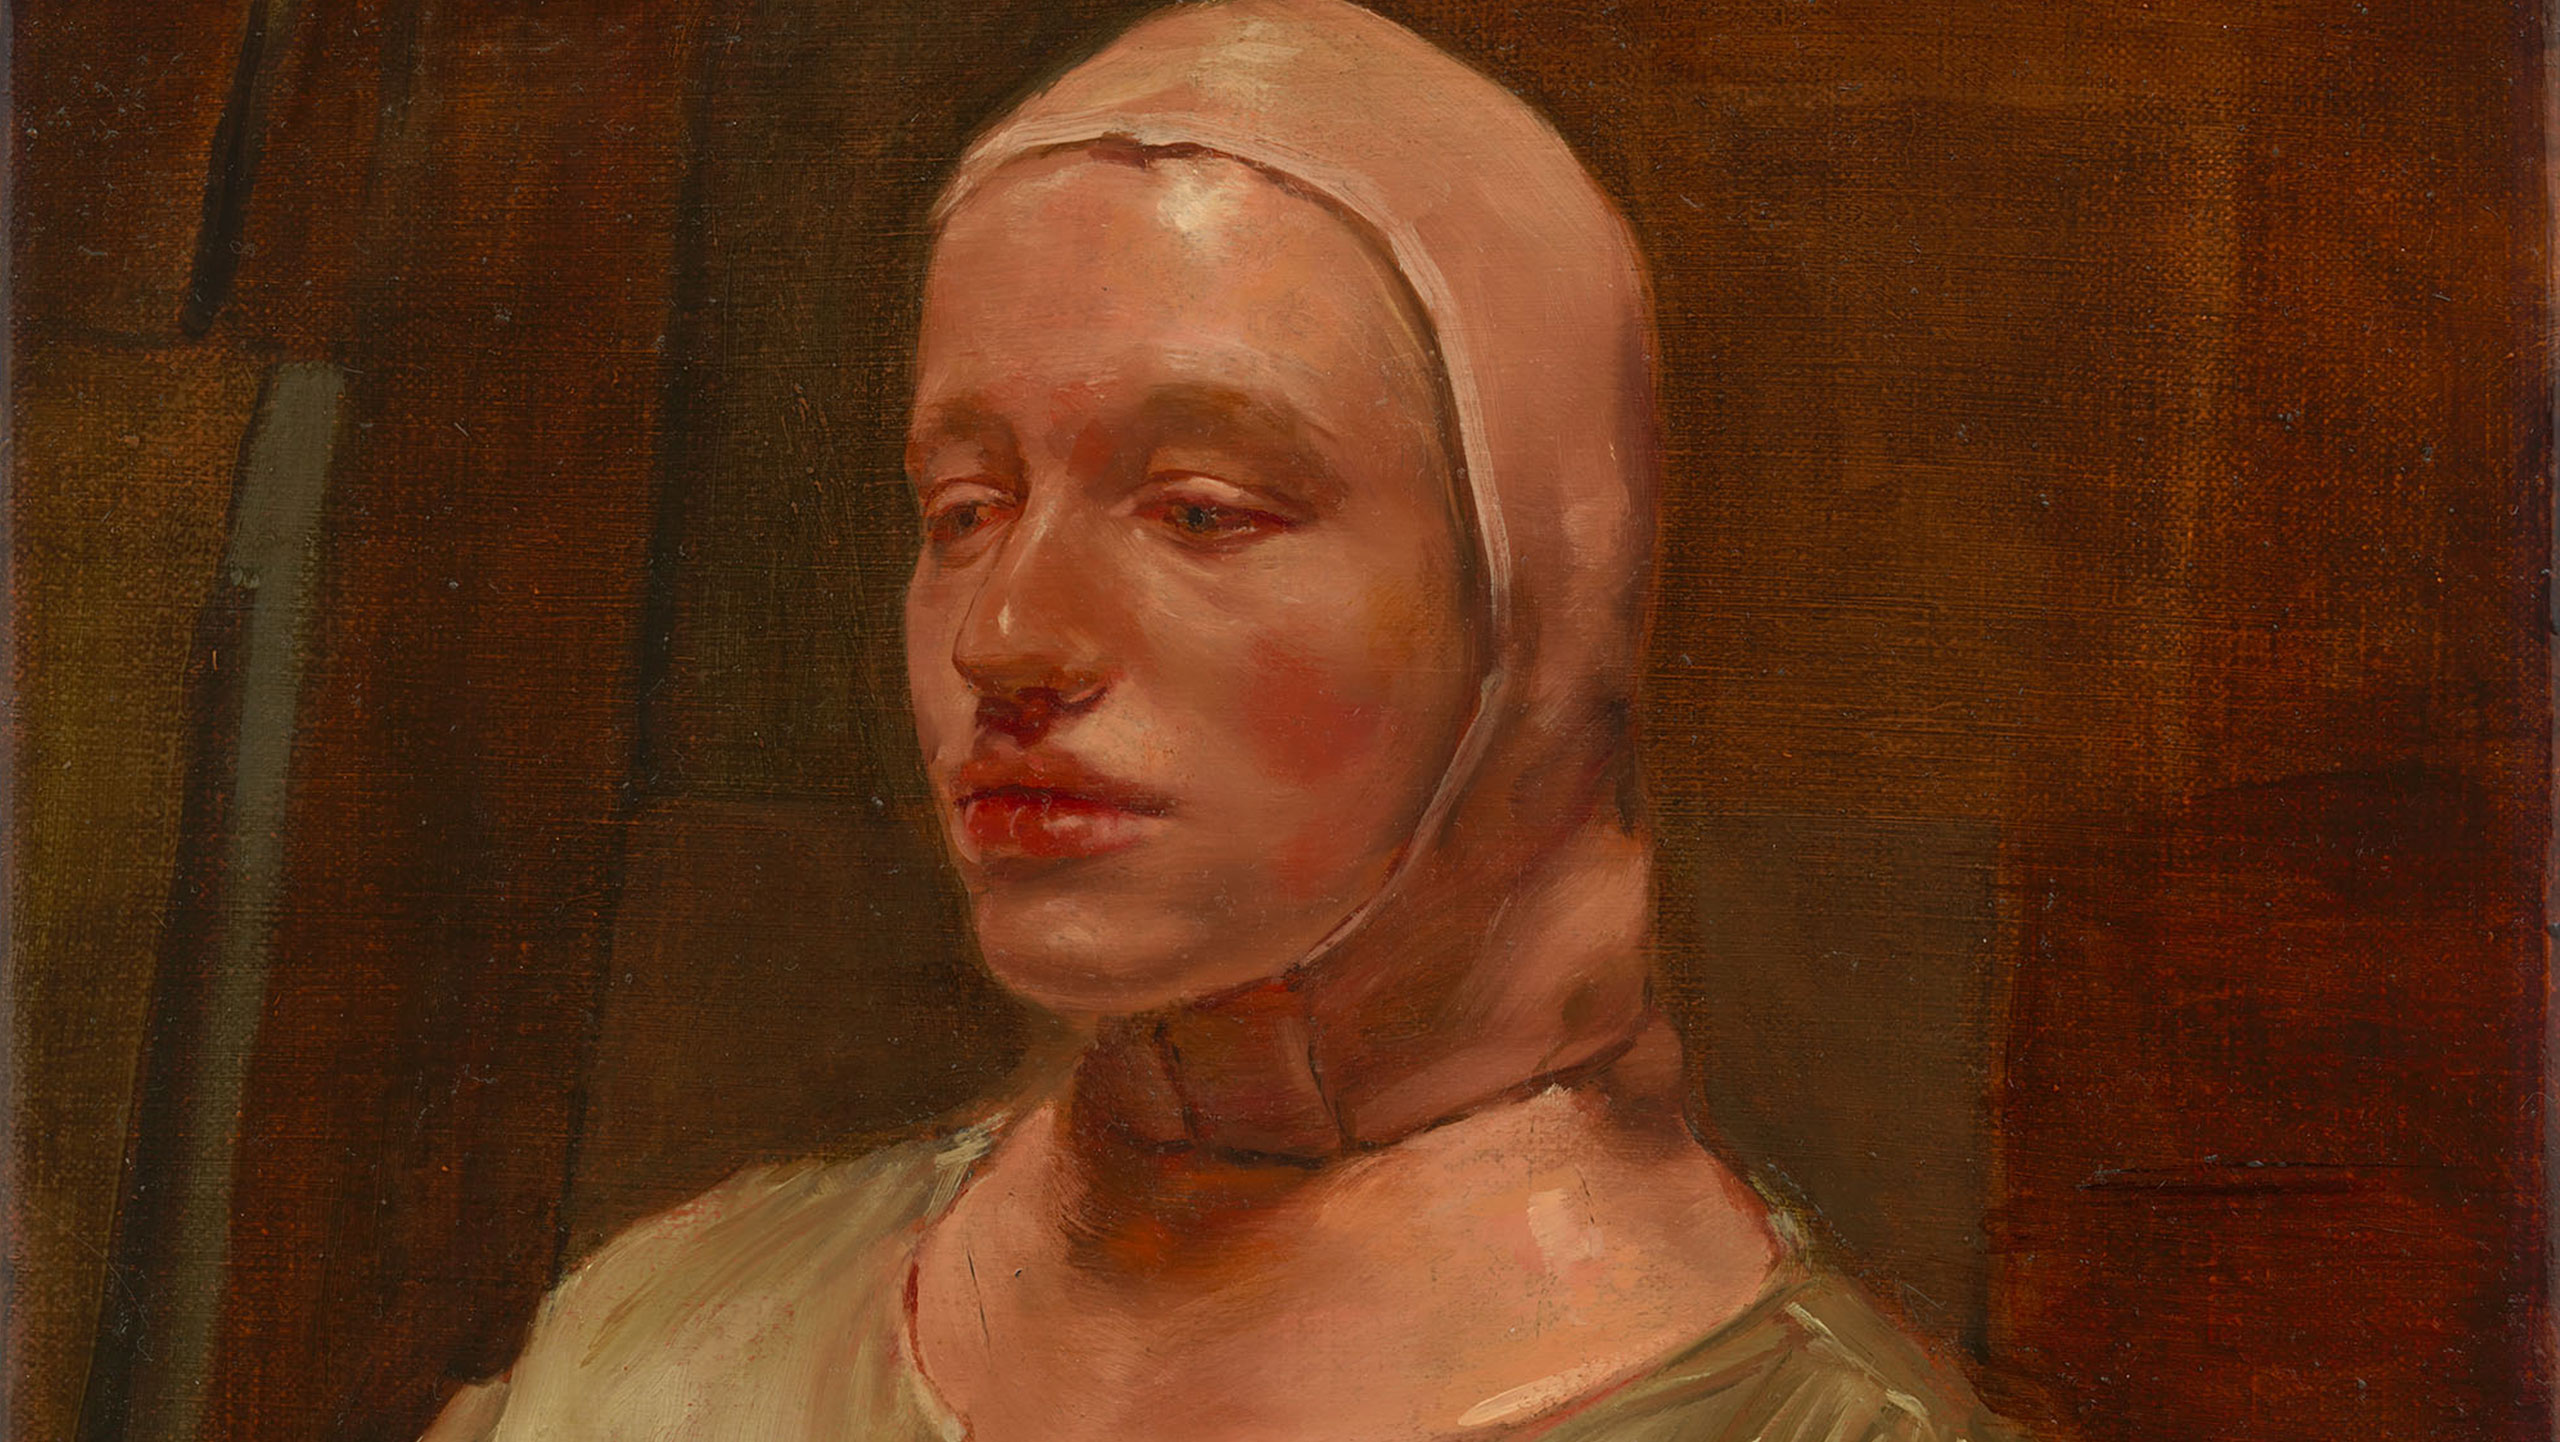 A detail of a painting by Michaël Borremans, titled The Double, dated 2022.